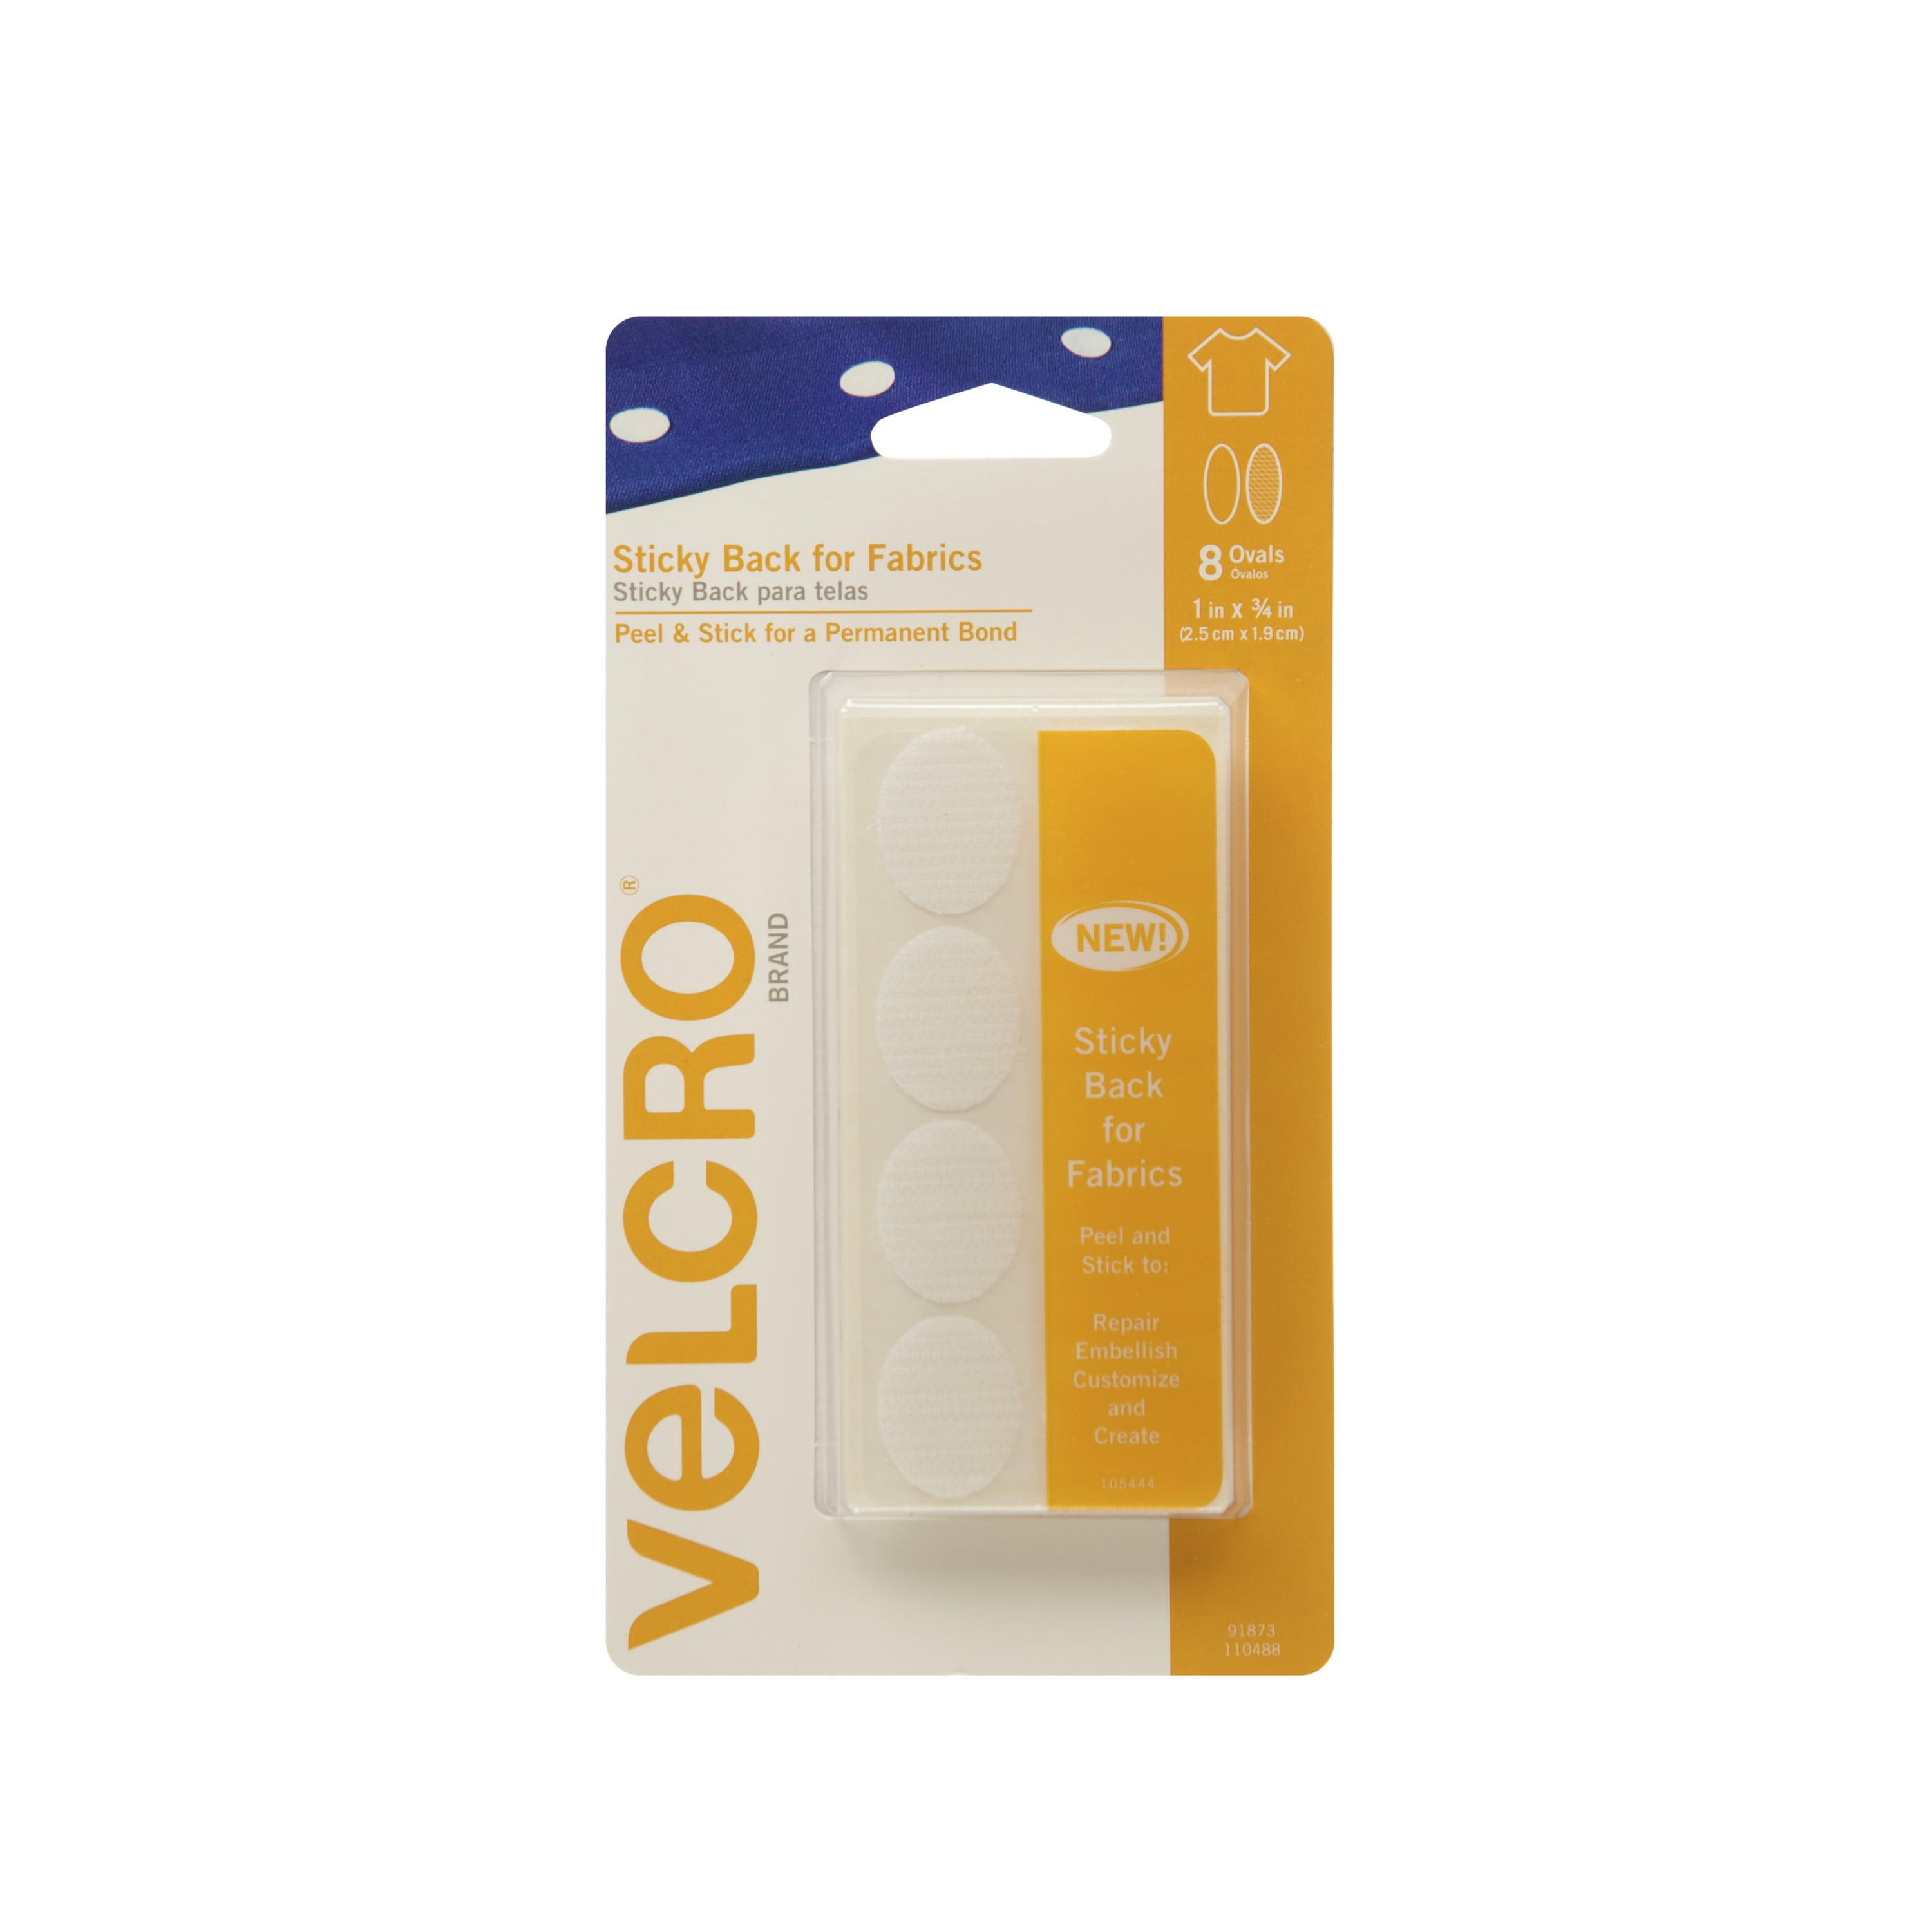 VELCRO Brand For Fabrics | Sew On Fabric Ovals for Alterations and Hemming | No Ironing or Gluing | Ideal Substitute for Snaps and Buttons | 1"x 3/4" White Ovals, 8 Count